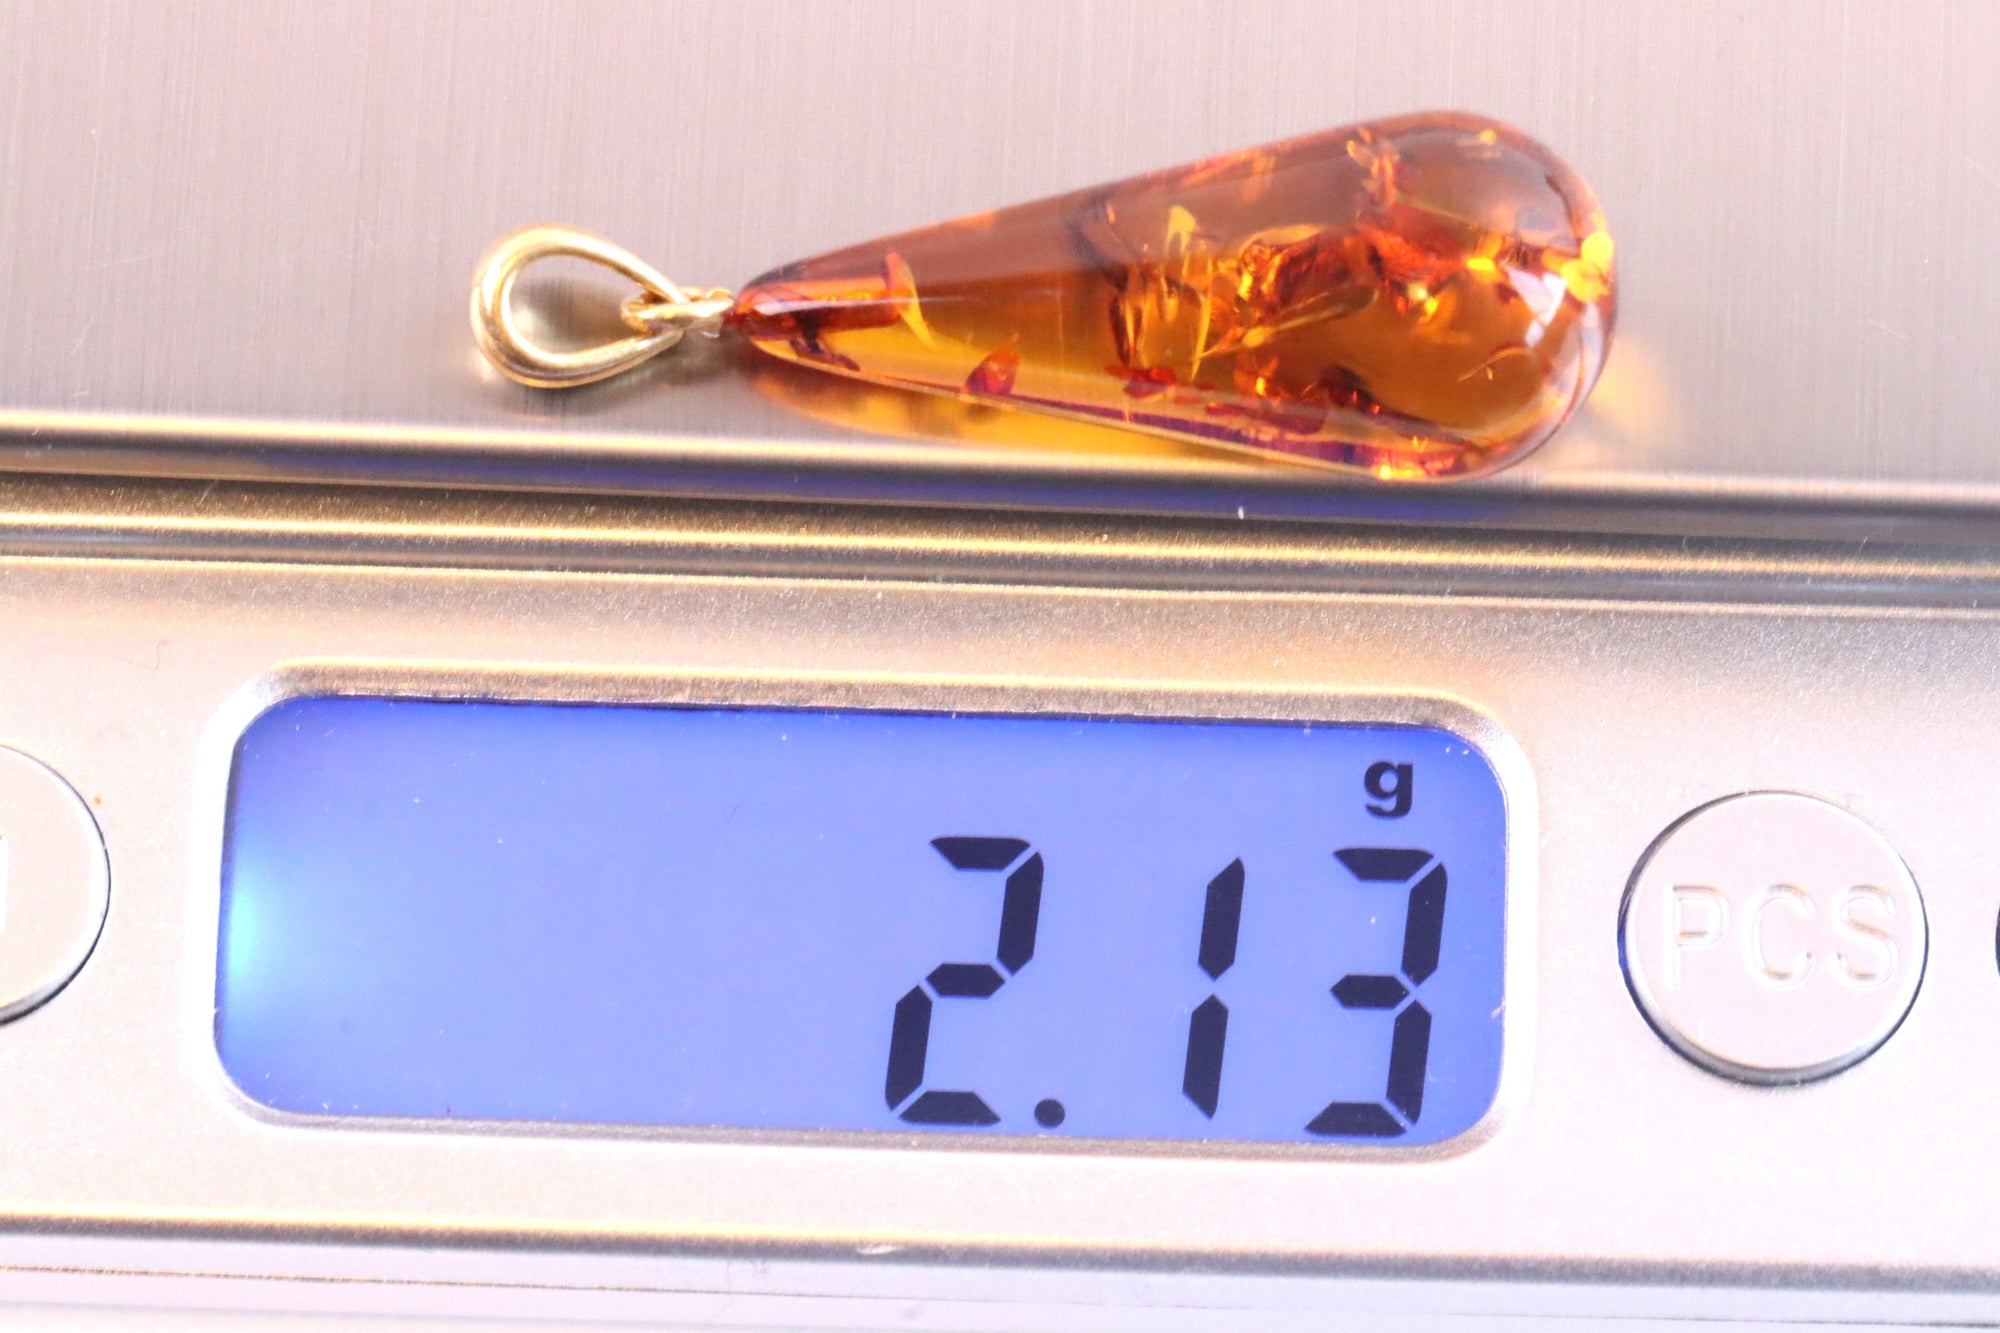 Amber Tear Drop Pendant on 925 Gold Plated Silver